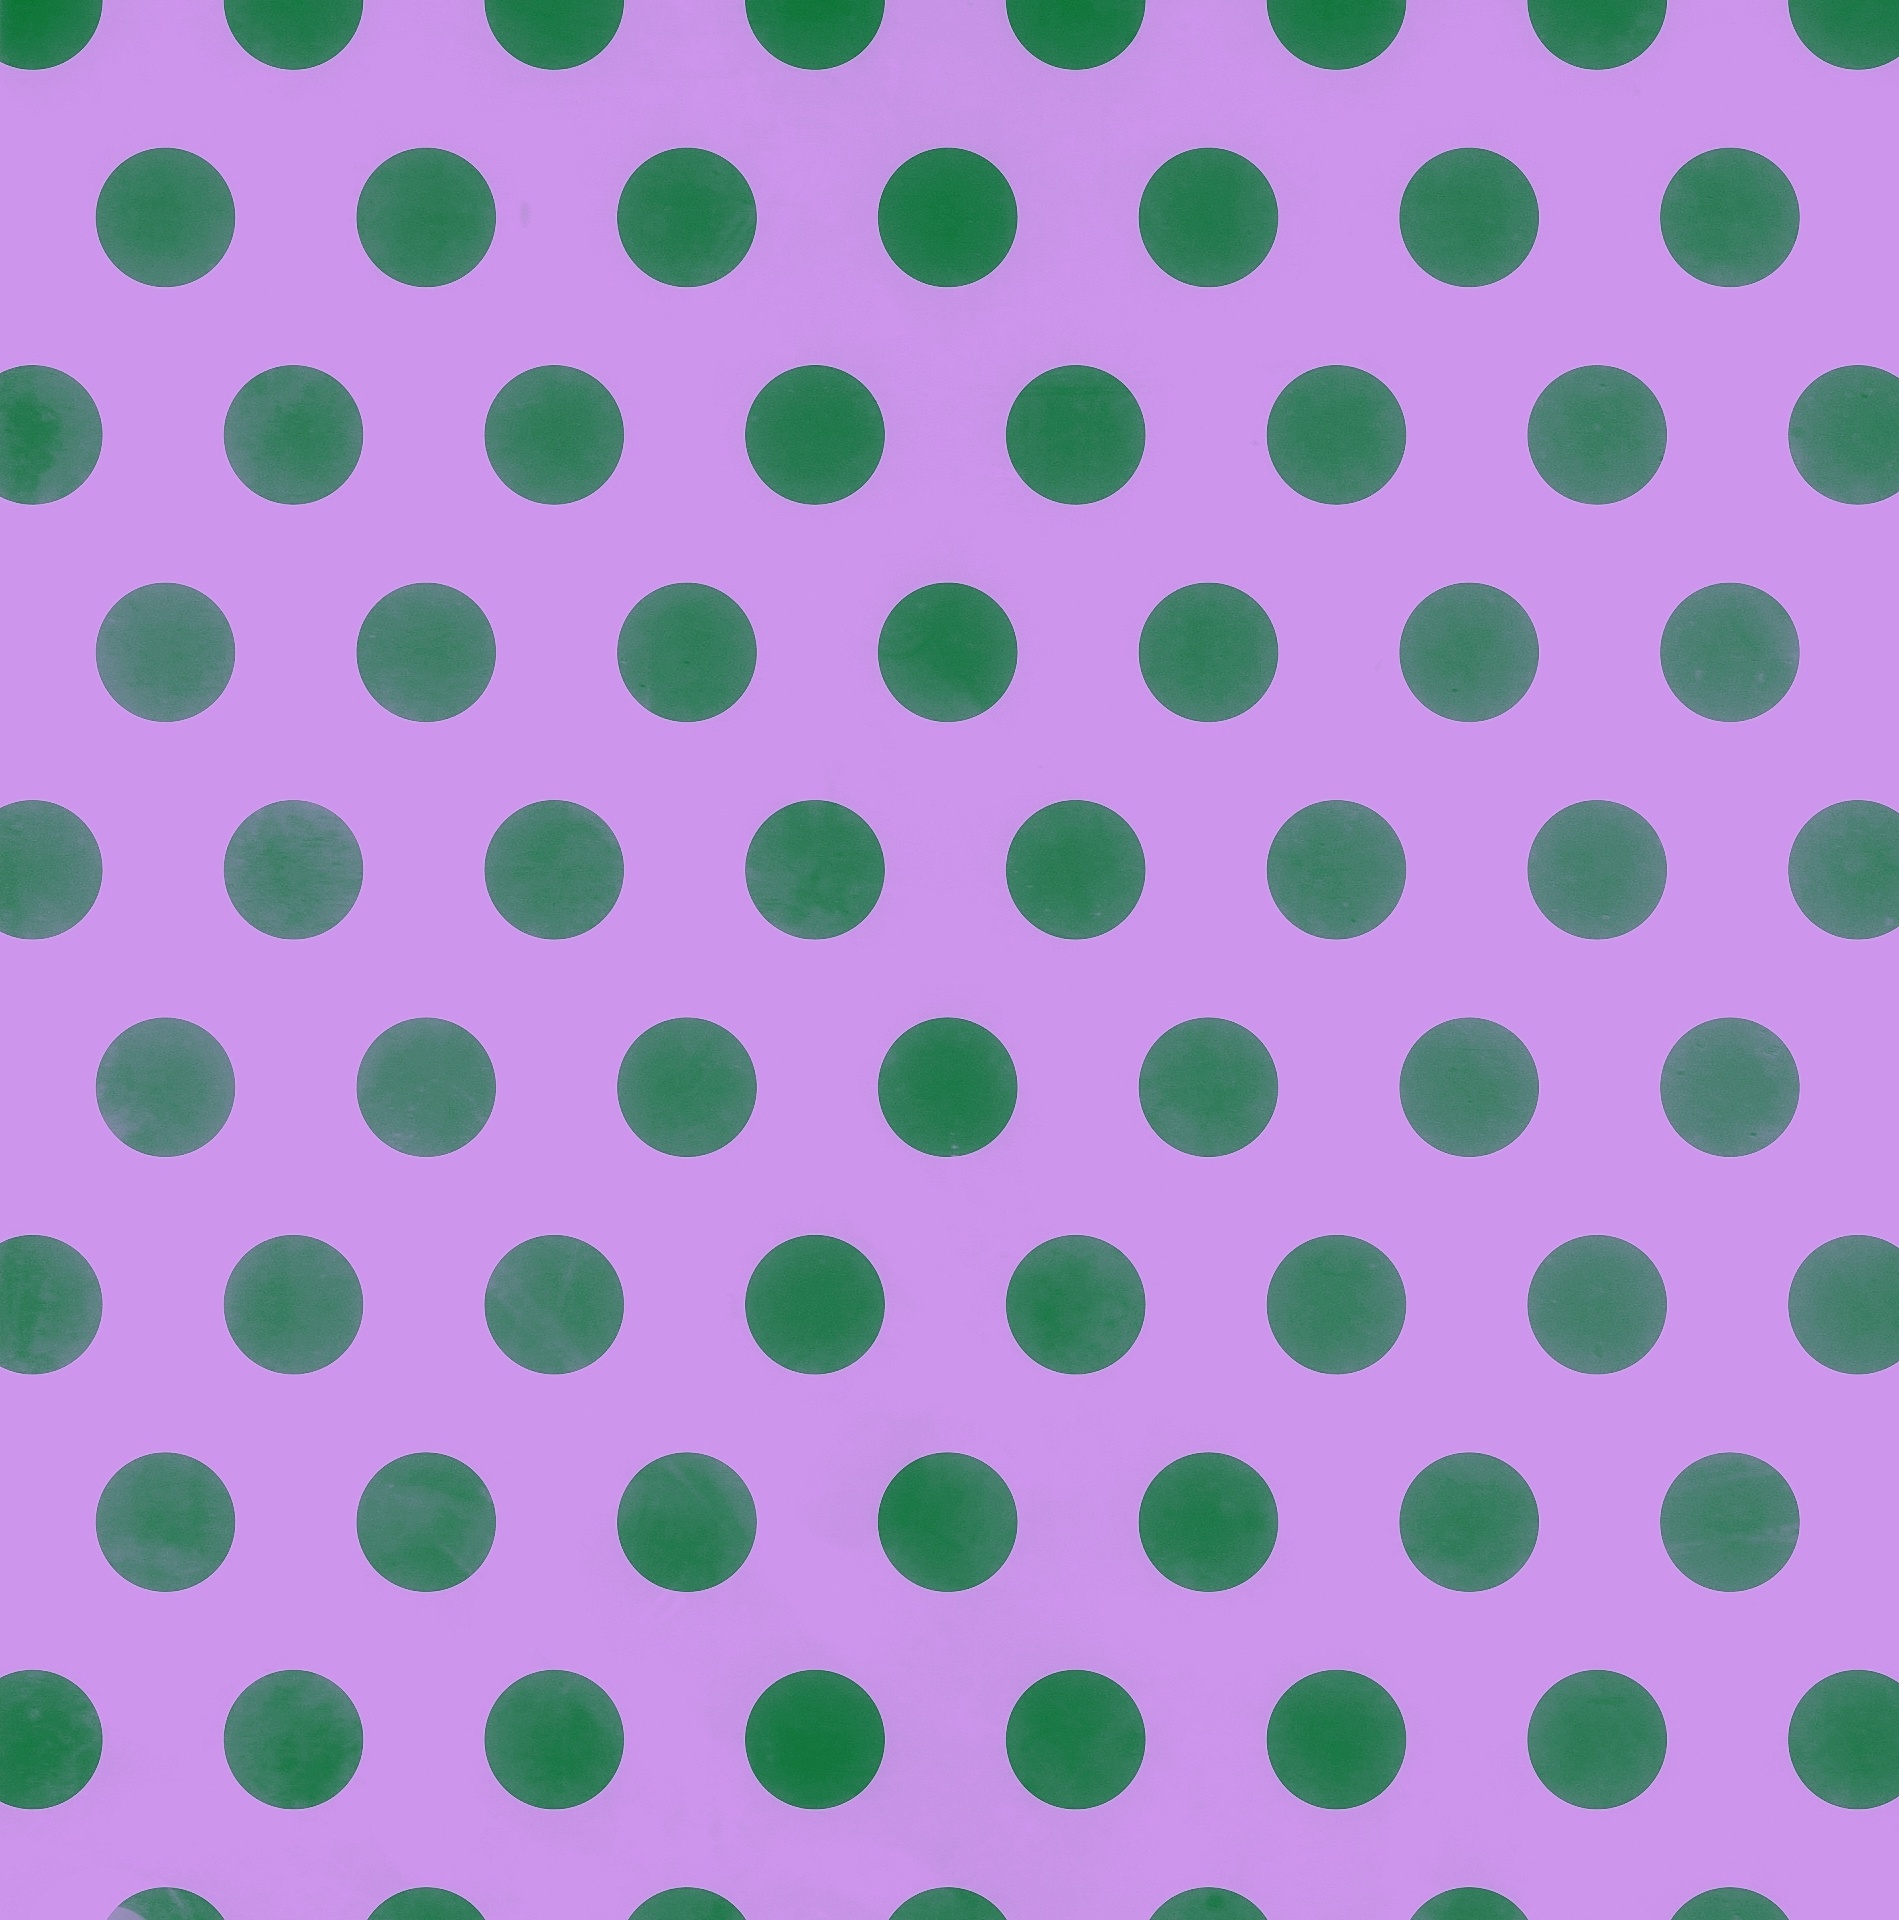 Dots Polka Dot Background Texture Free Stock Photo - Public Domain Pictures